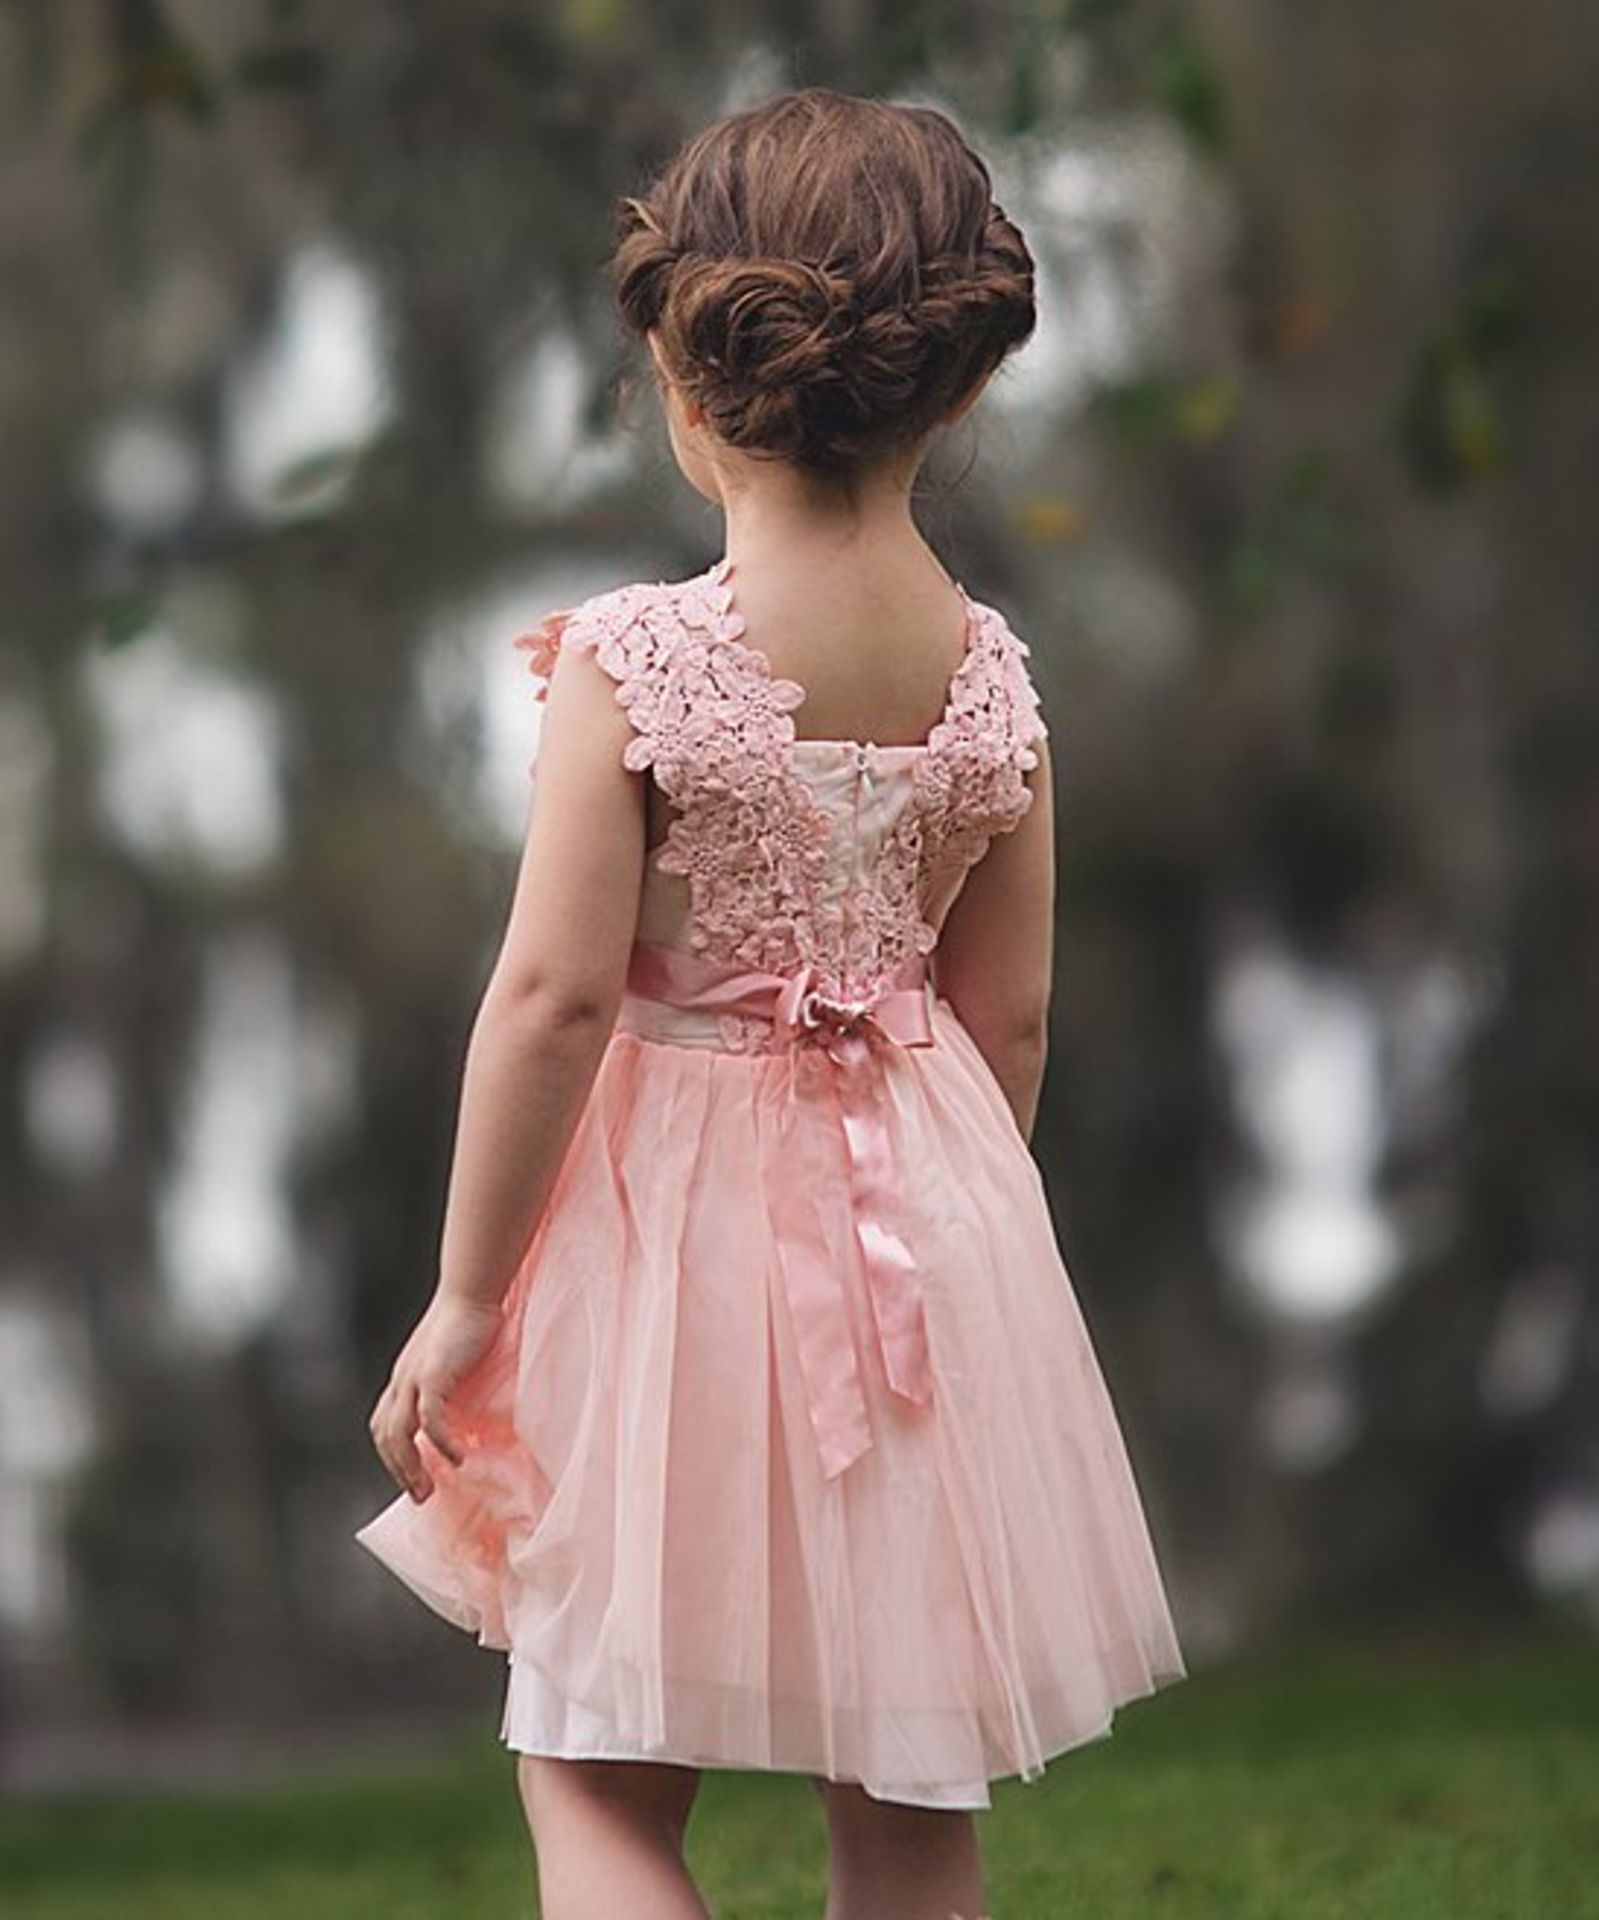 Blush Lace Accent A-Line Dress - Infant, Toddler & Girls - Image 3 of 3